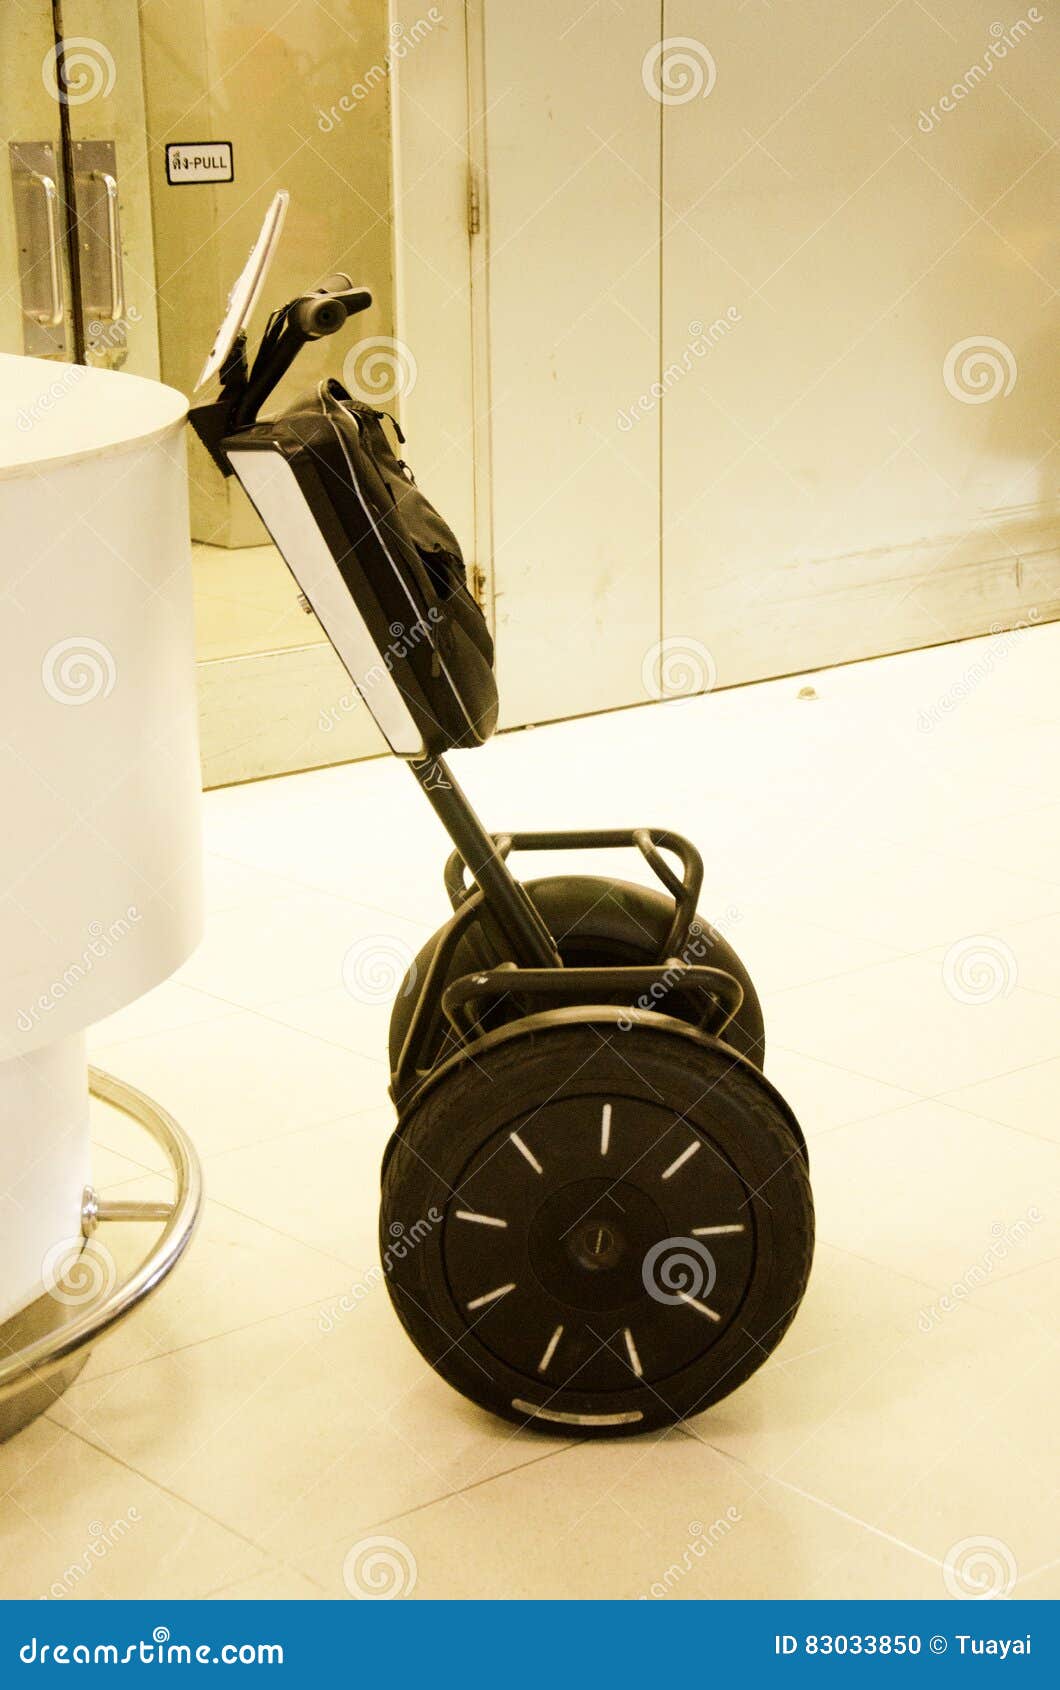 Smart Electric Balance Wheel for Security Guard Us Editorial Image Image of technology, 83033850